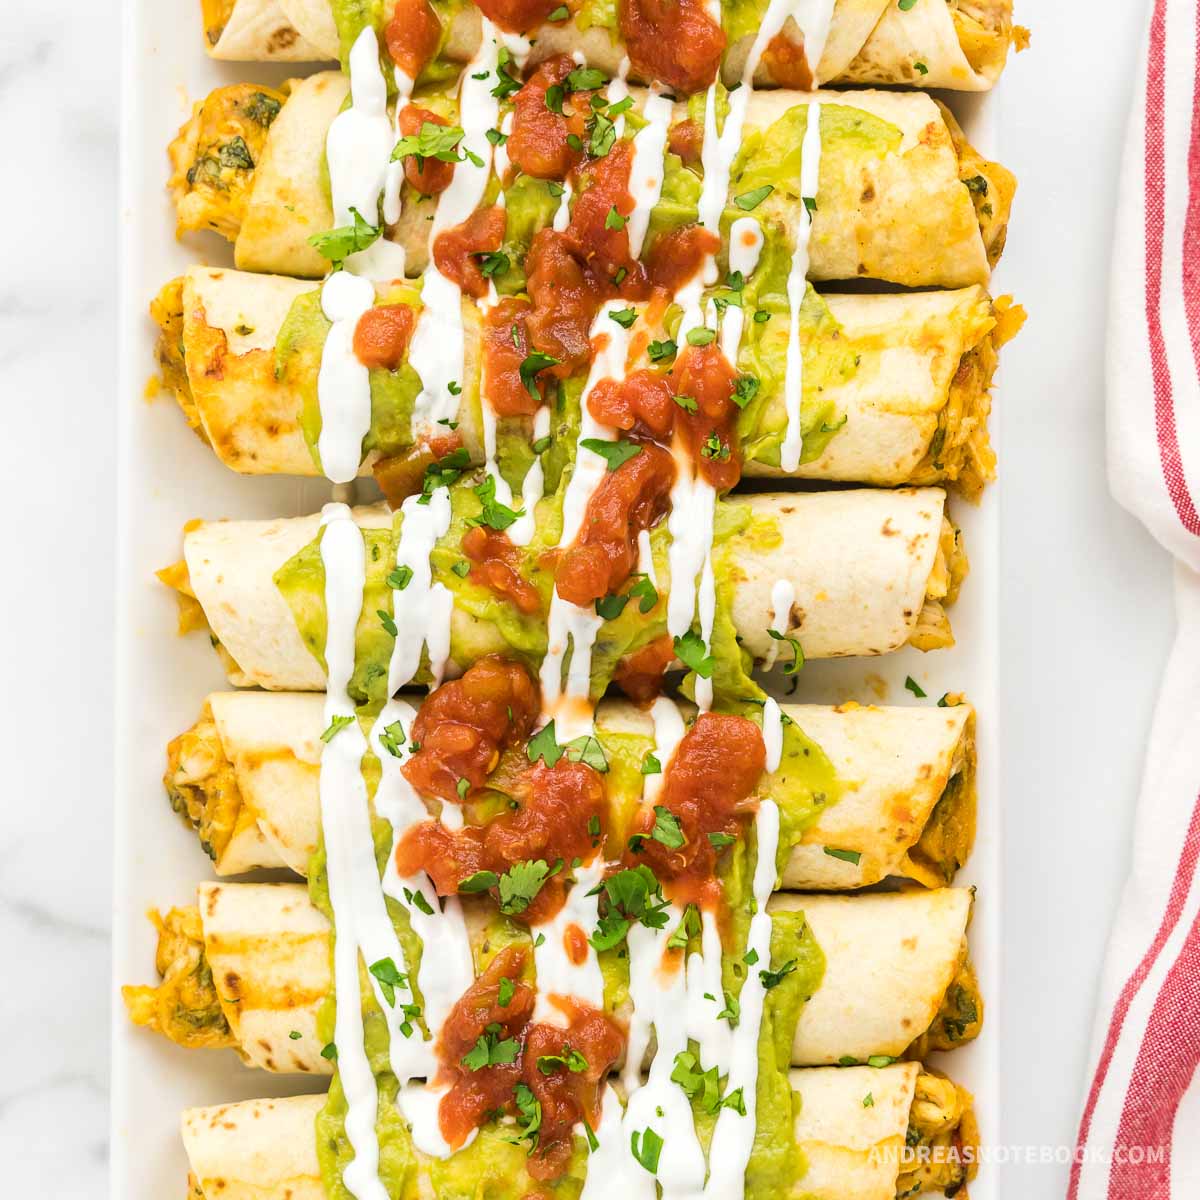 Platter with 7 cooked chicken taquitos in a row covered in salsa, guacamole and sour cream.